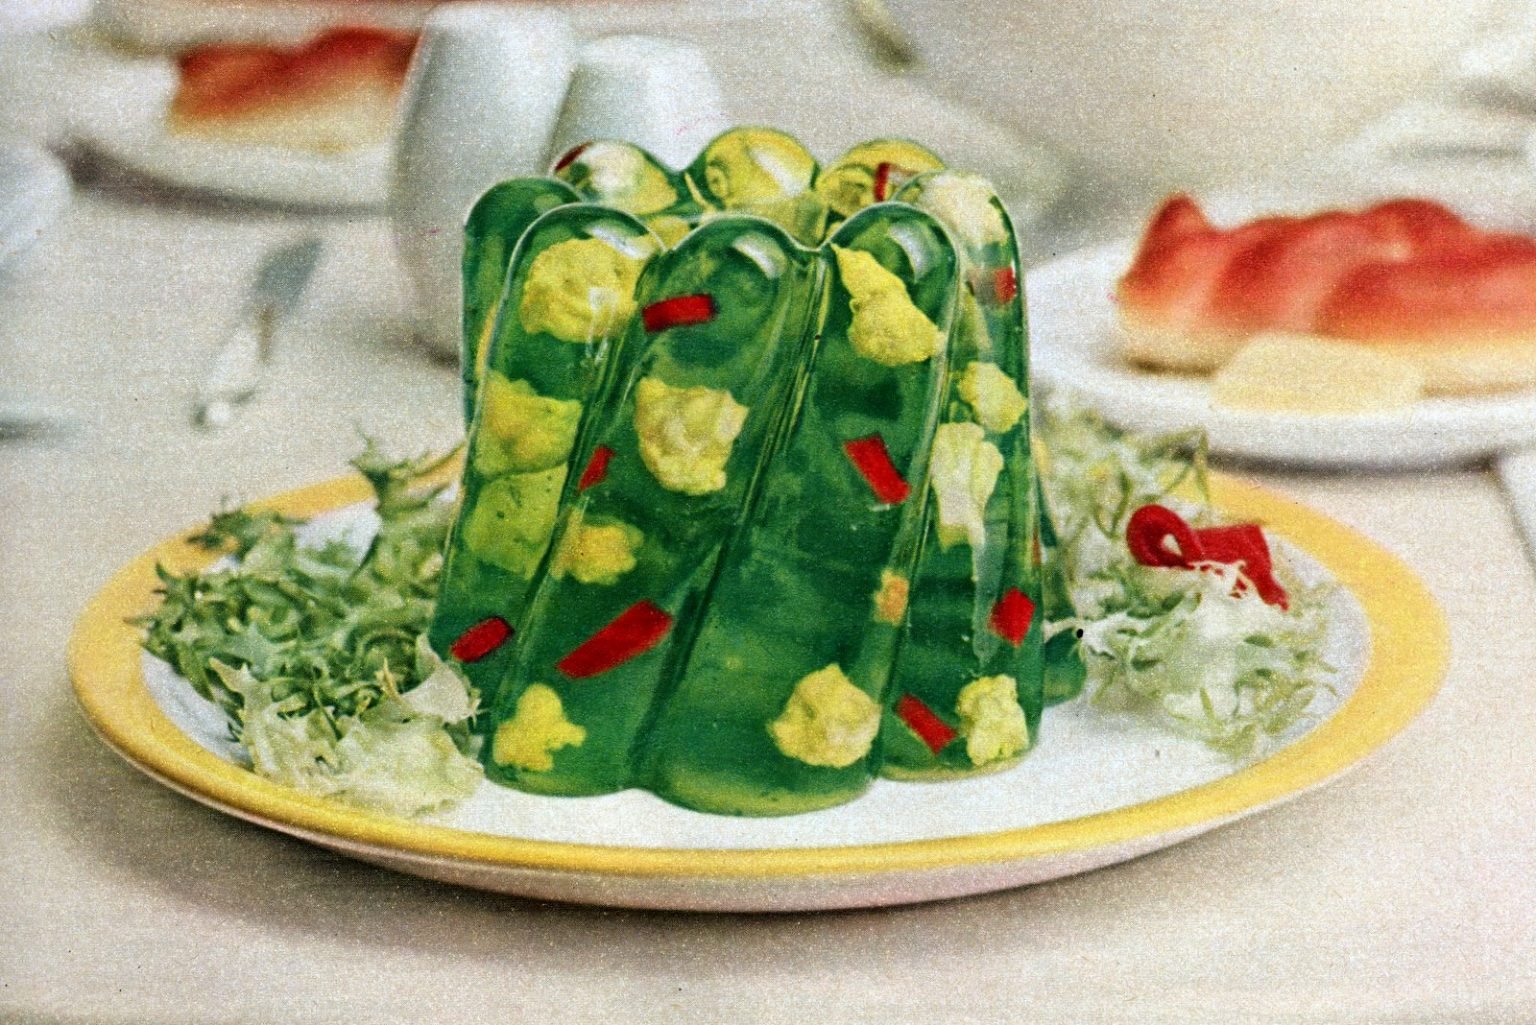 Trust Me, I Can Tell Which Generation You’re from Based on the Retro Food You Like Sequin salad